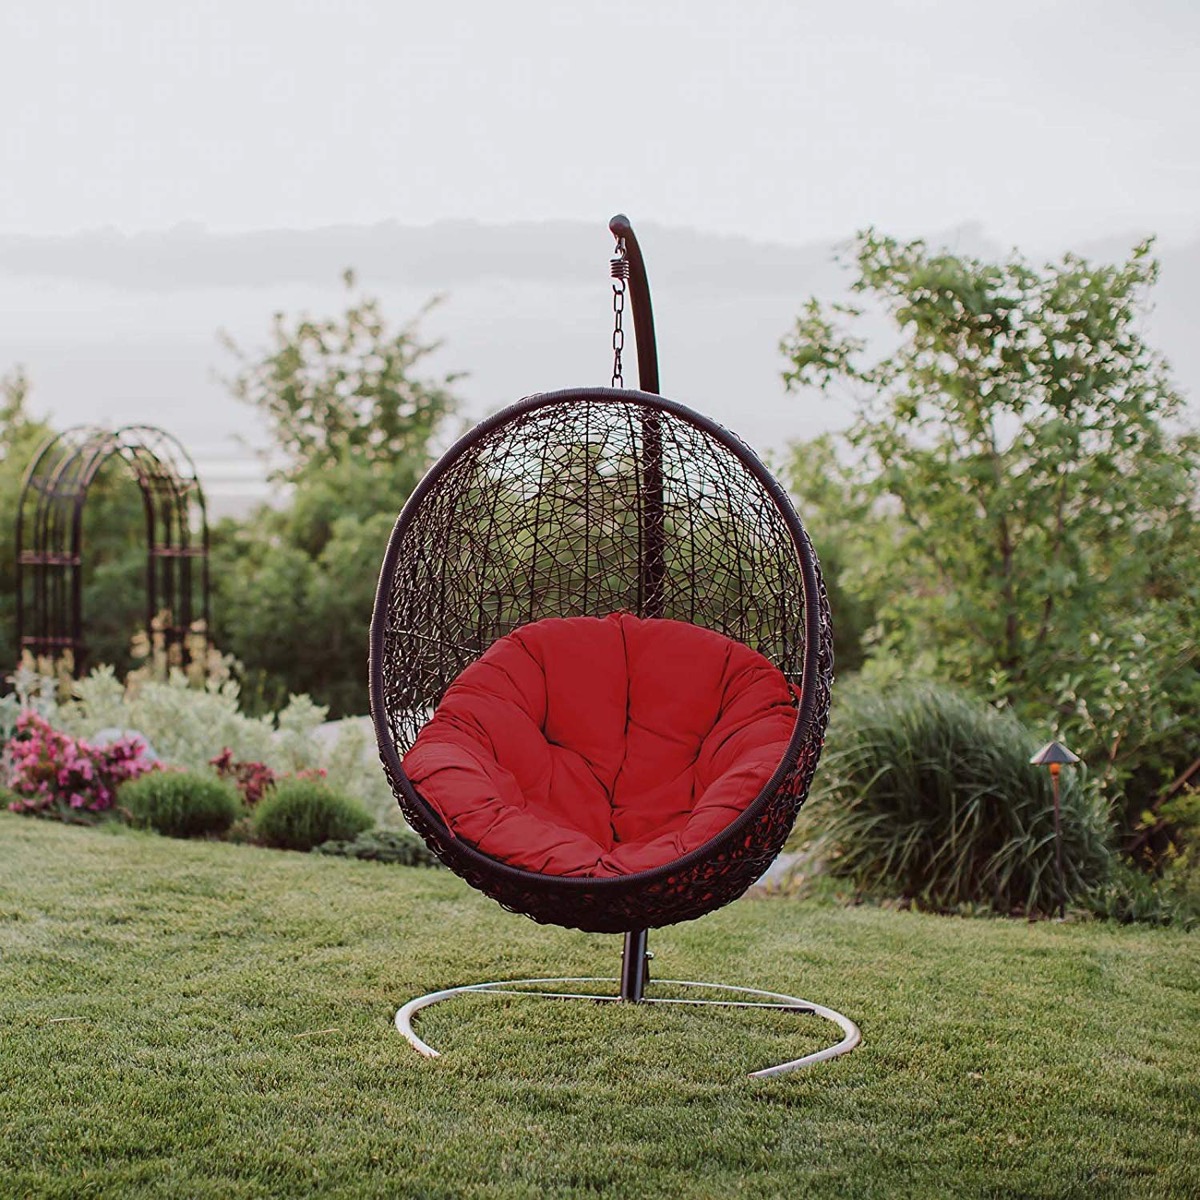 43 Hanging Chairs And Seats To Get You, Free Standing Outdoor Hanging Chair